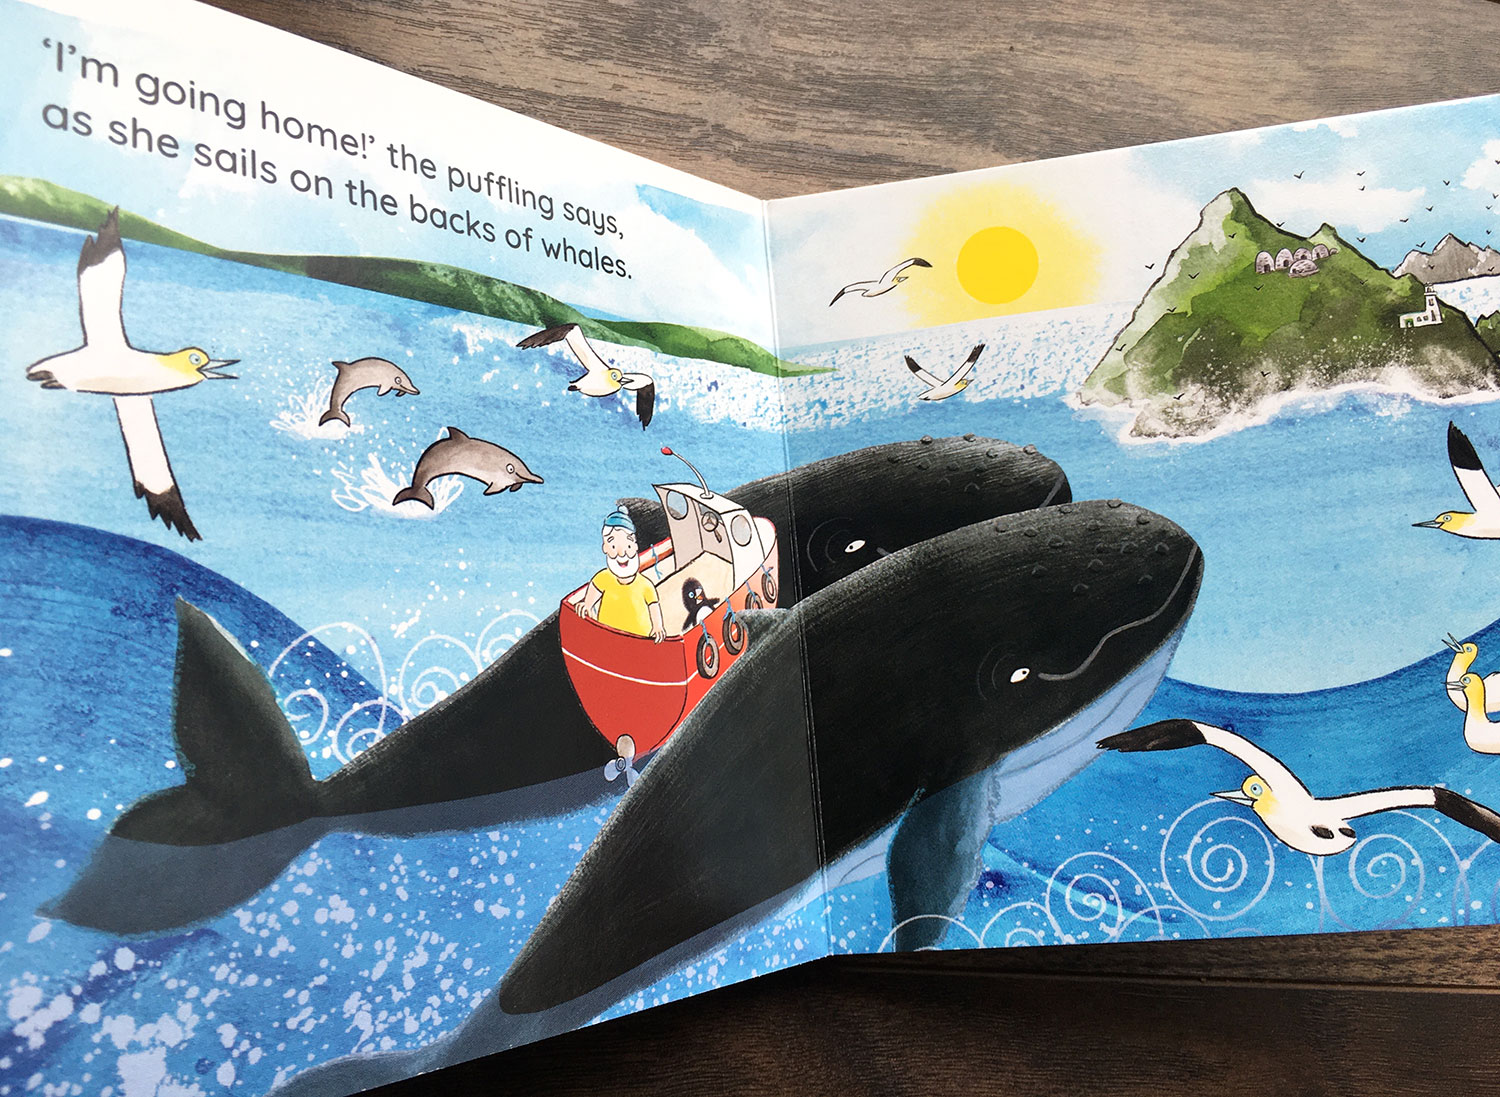 Where Are You Puffling? board book puffling returns home on the backs of whales